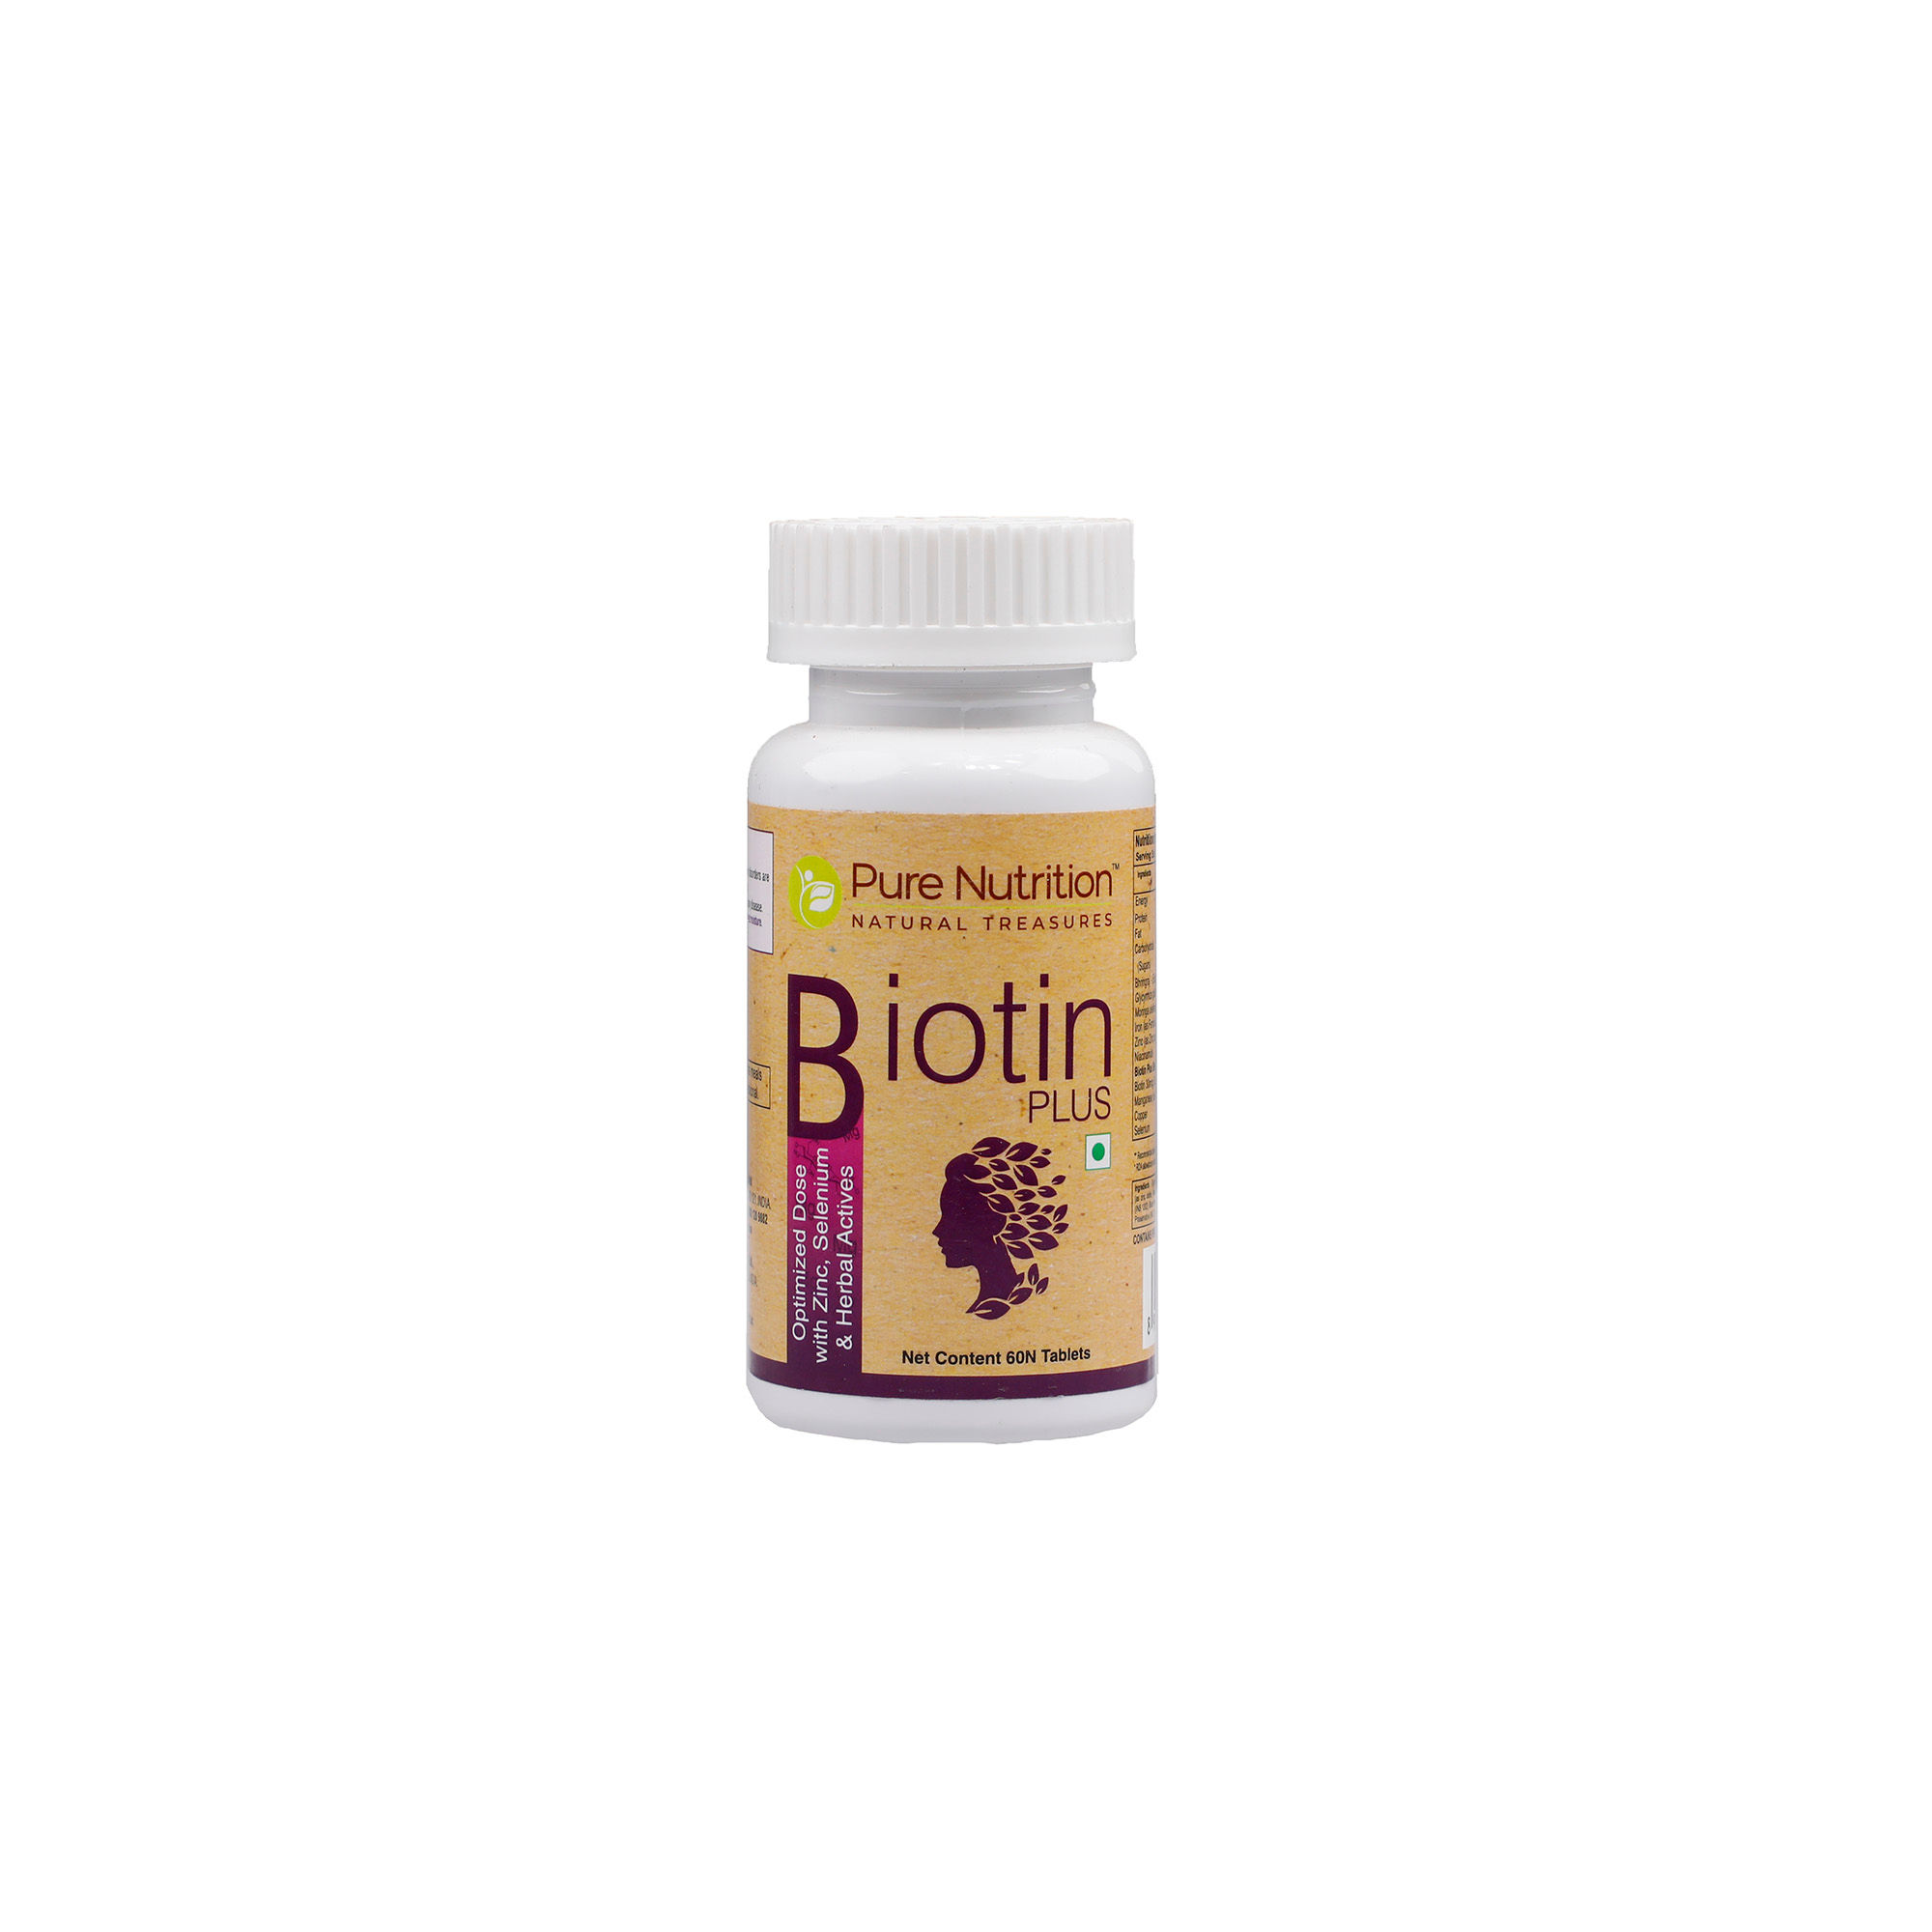 Pure Nutrition Biotin⁺, 60 Tablets, Pack of 1 